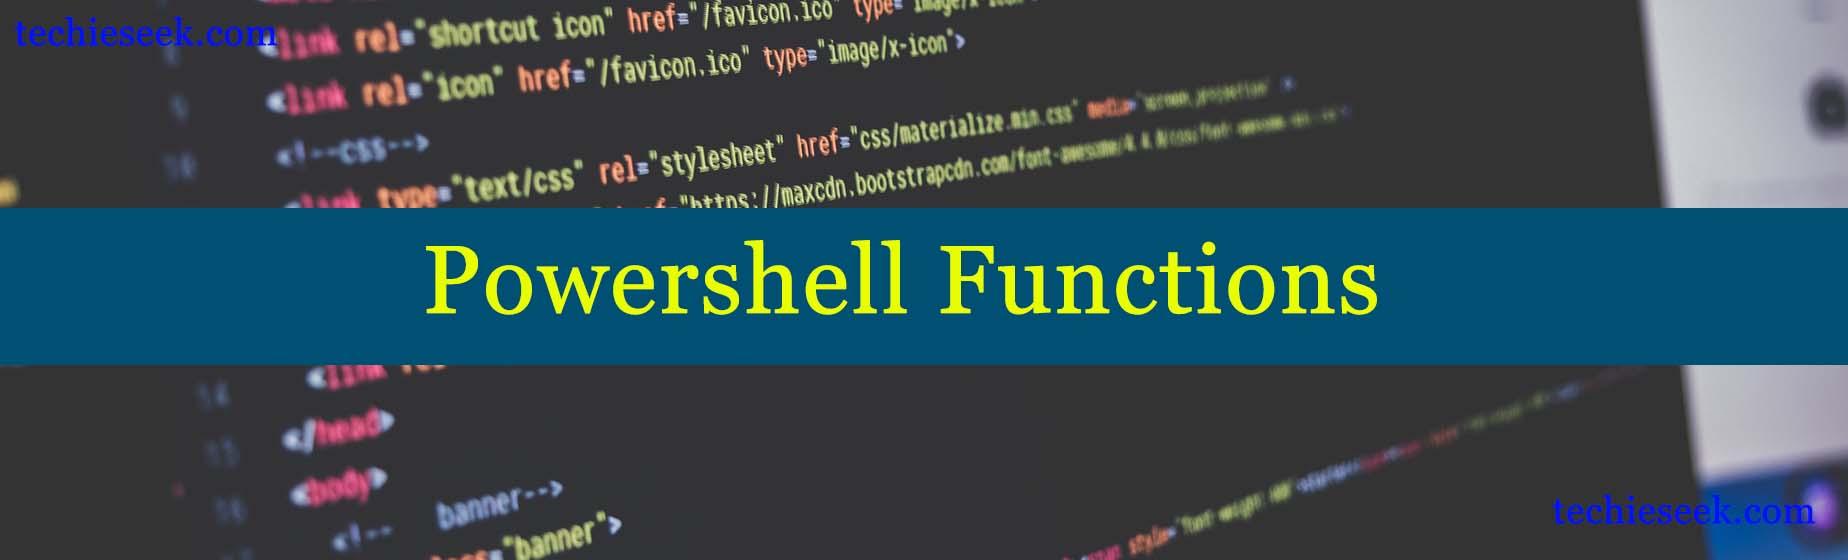 powershell functions